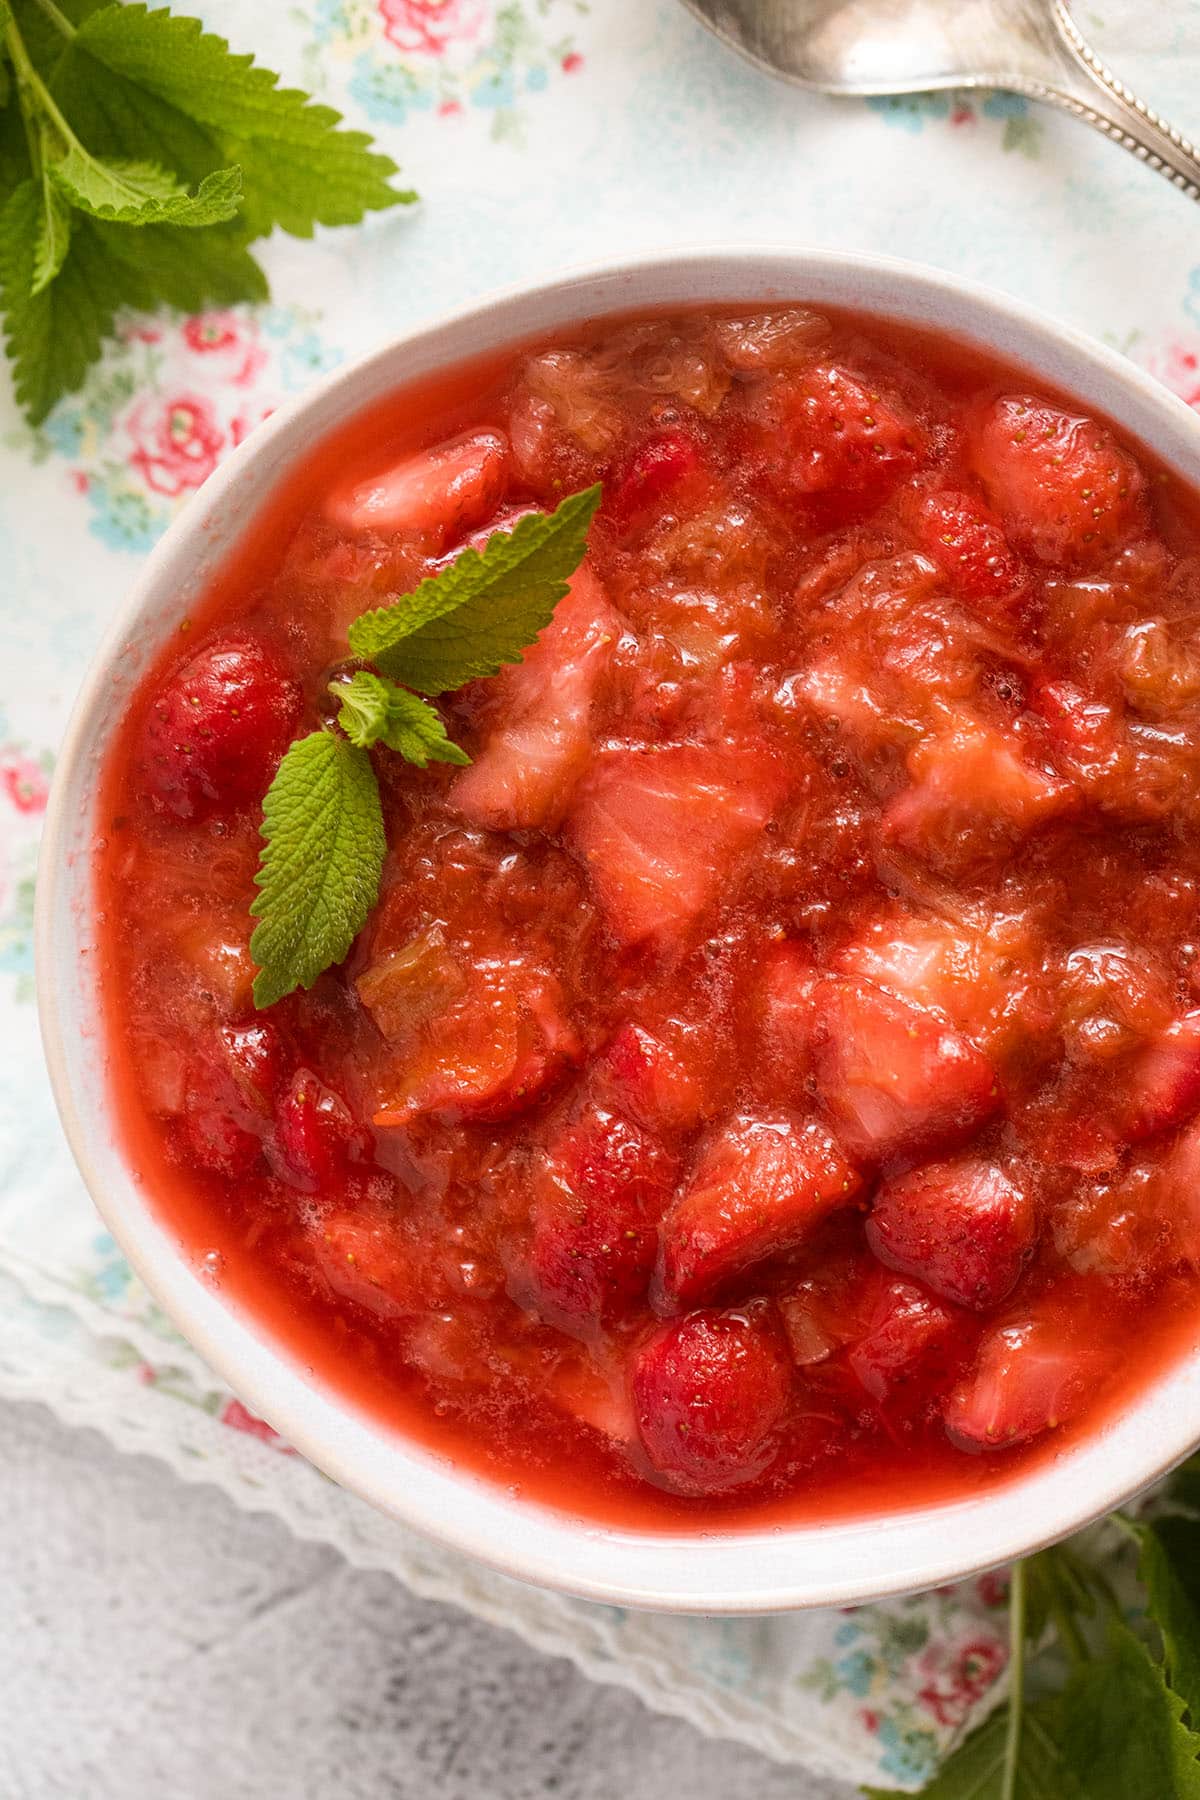 vibrant red stewed rhubarb and strawberries.